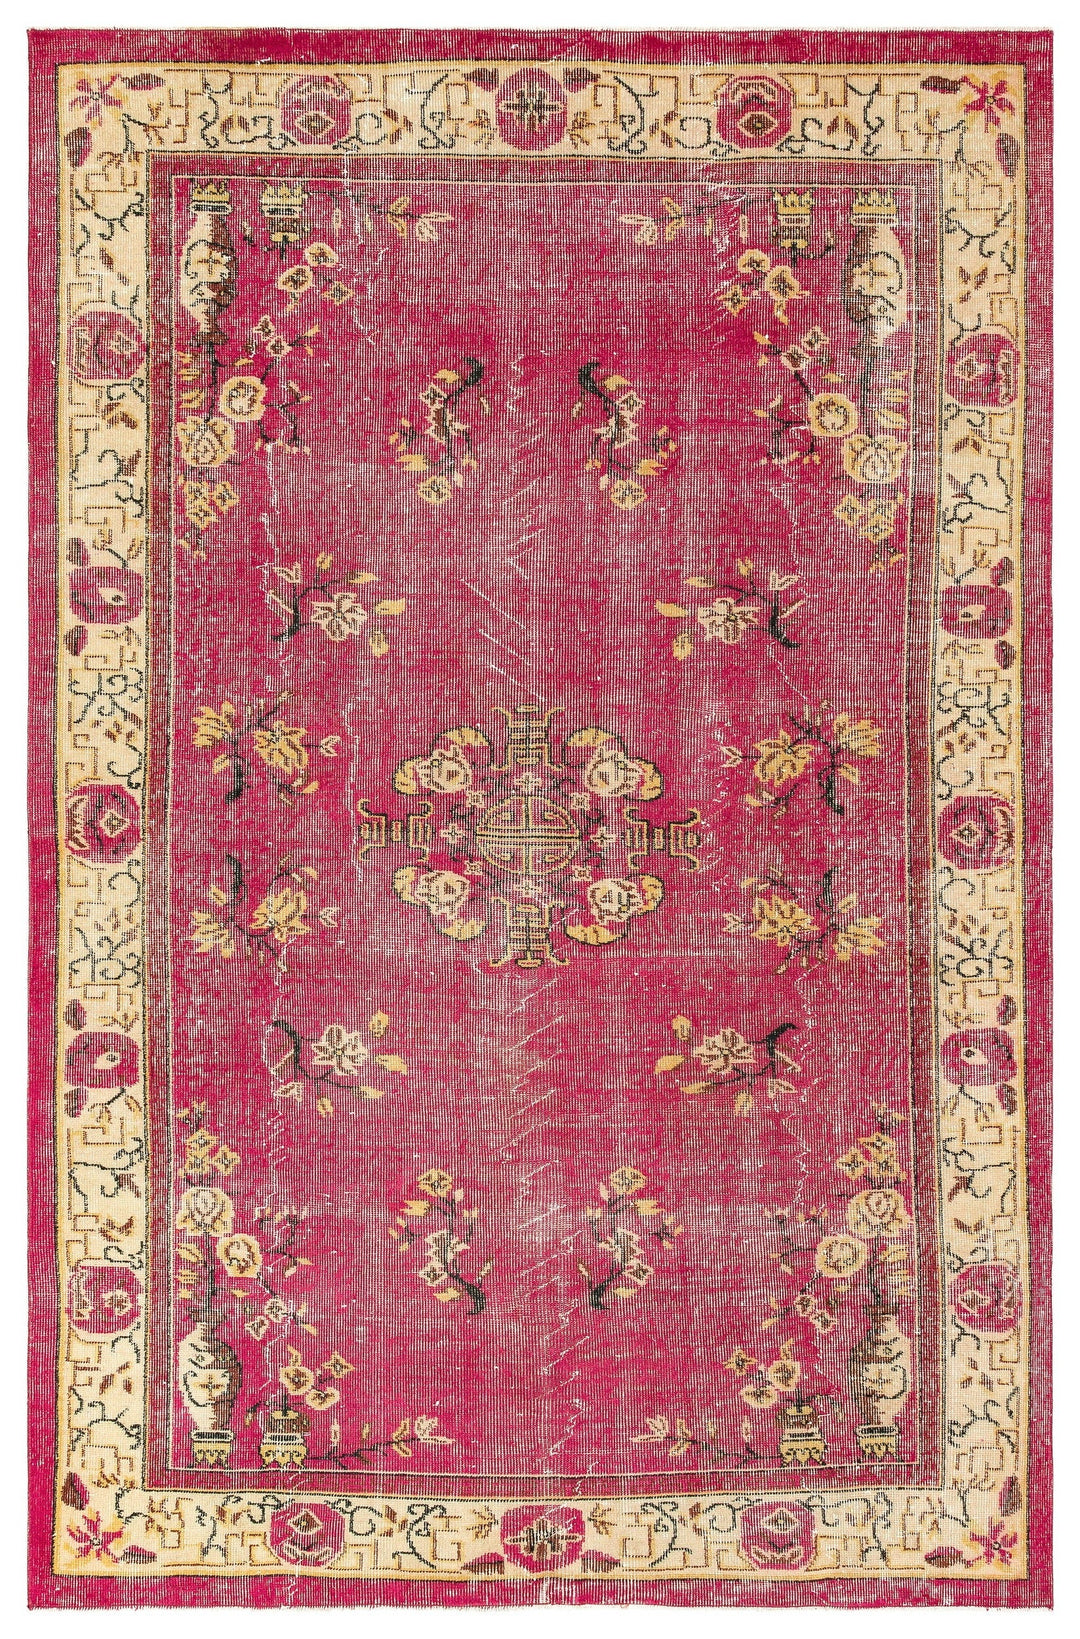 Athens Red Tumbled Wool Hand Woven Carpet 179 x 273